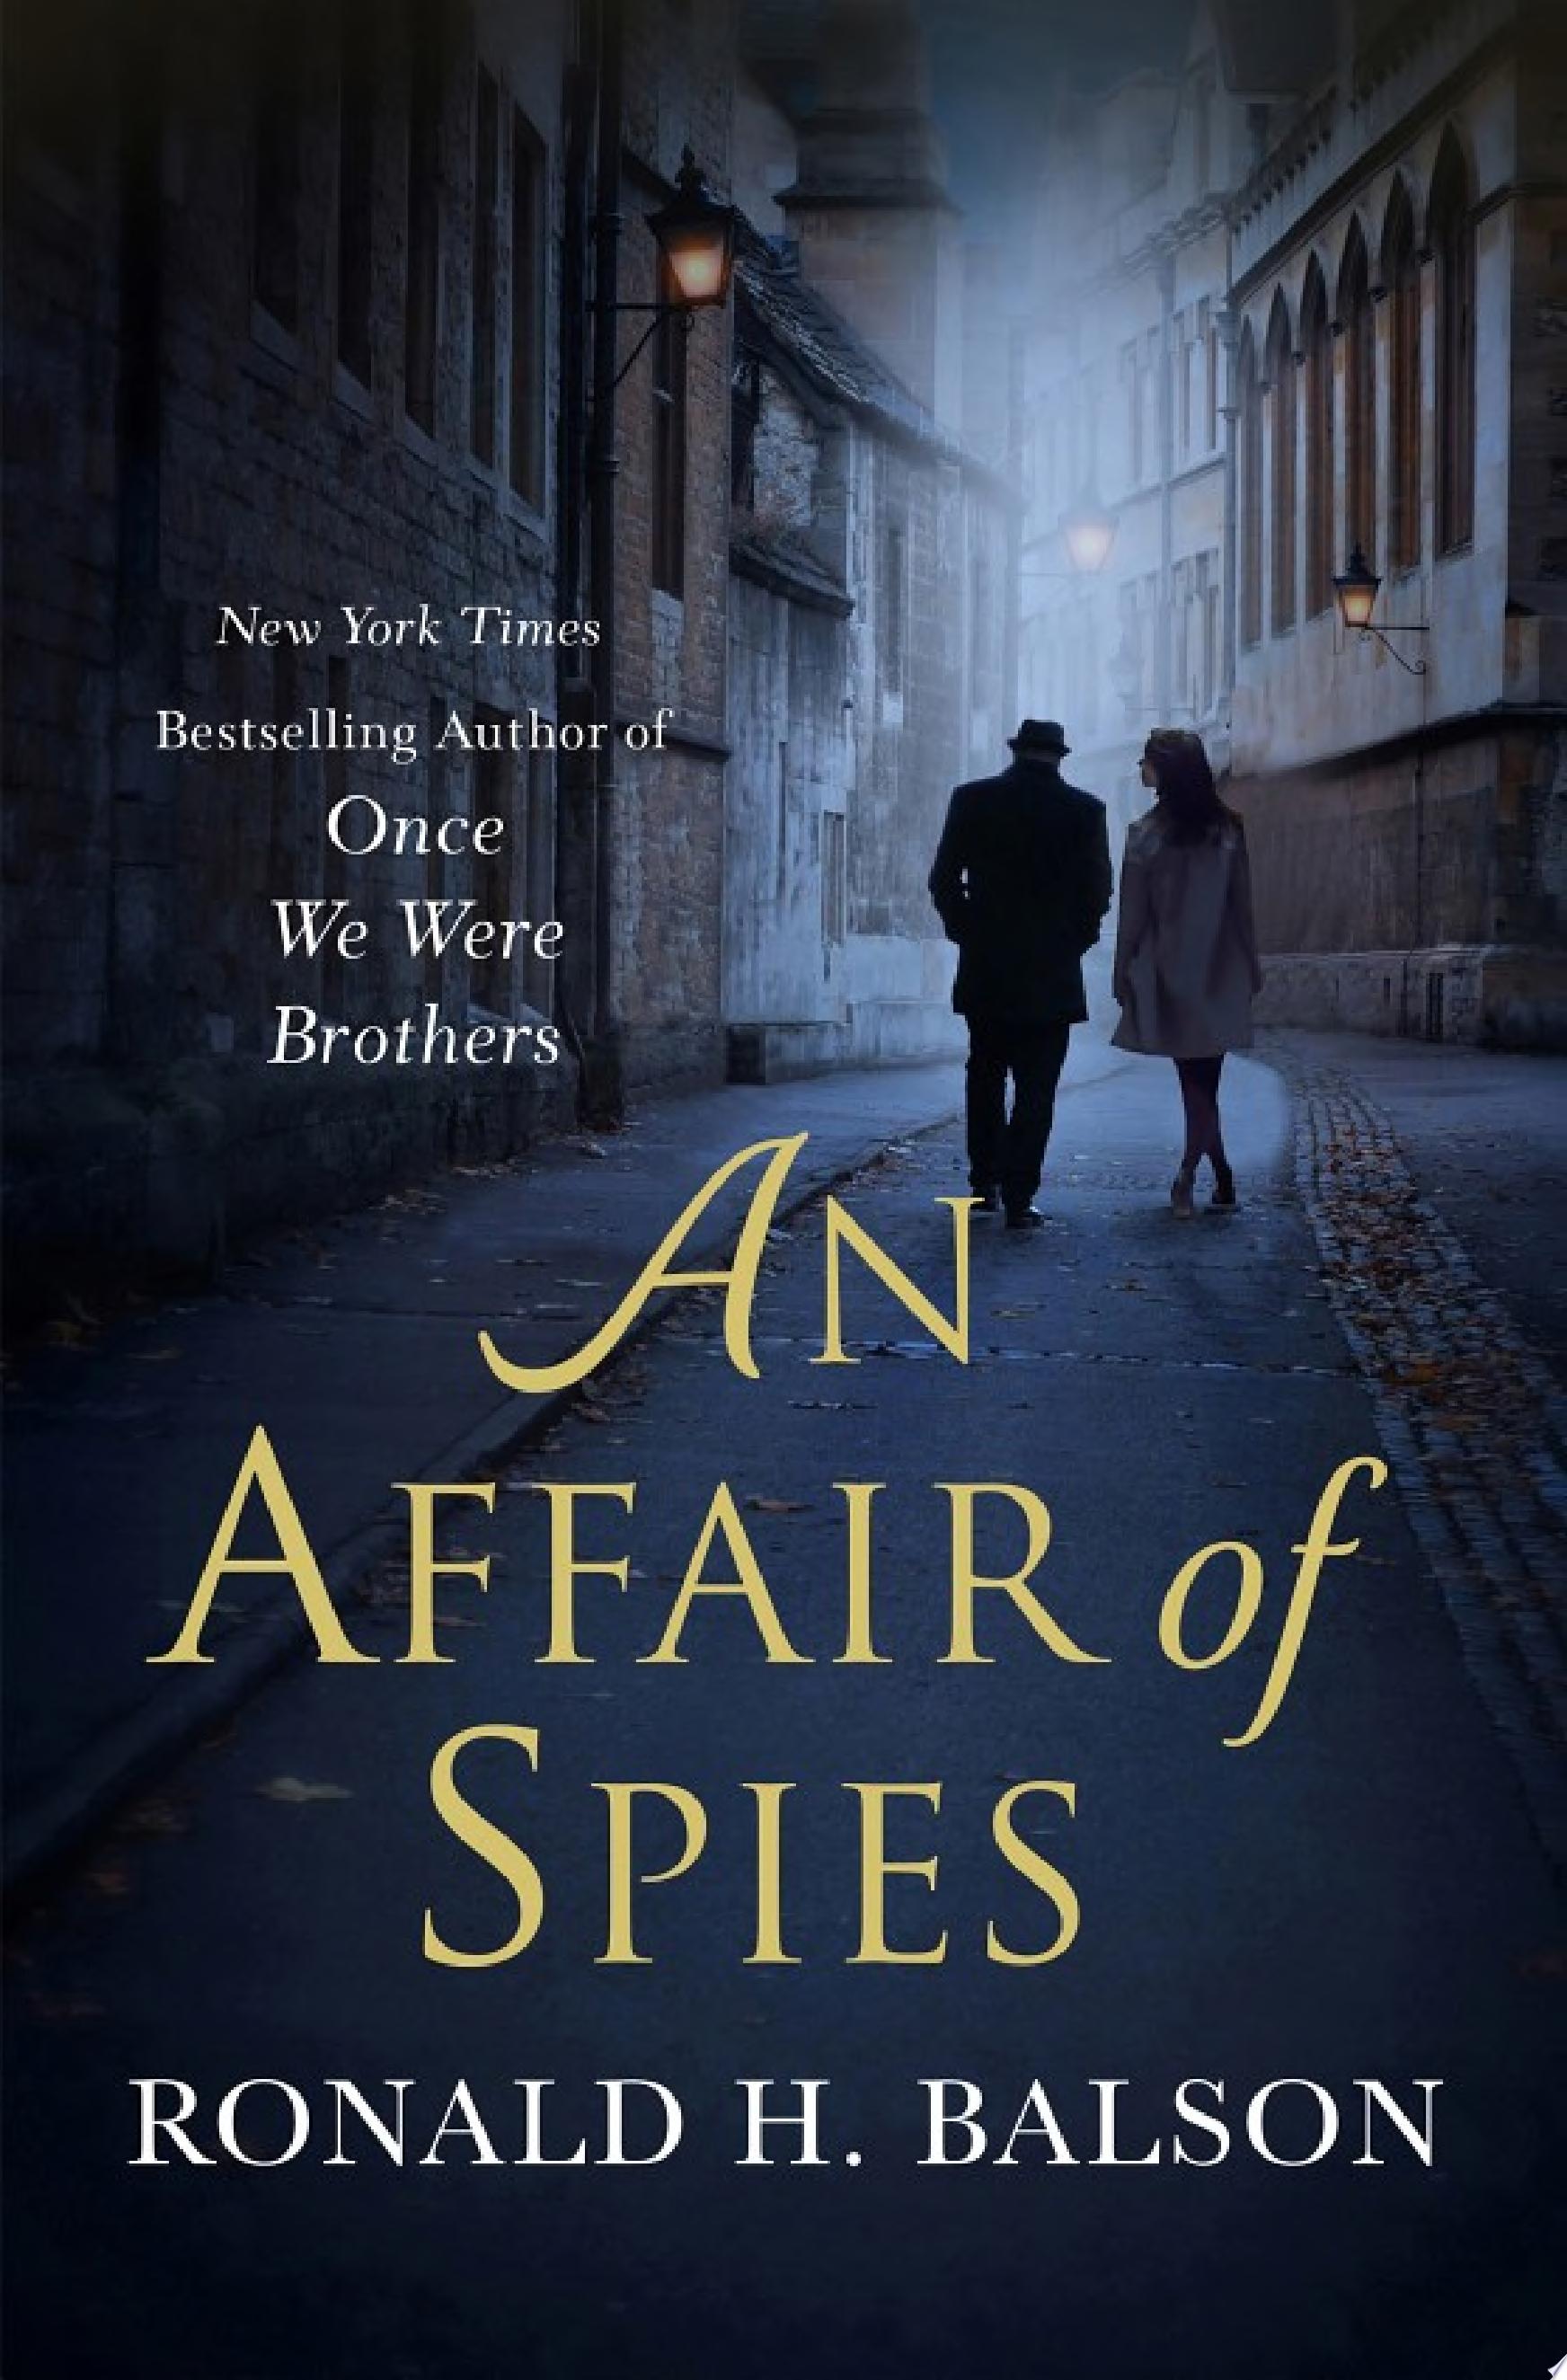 Image for "An Affair of Spies"